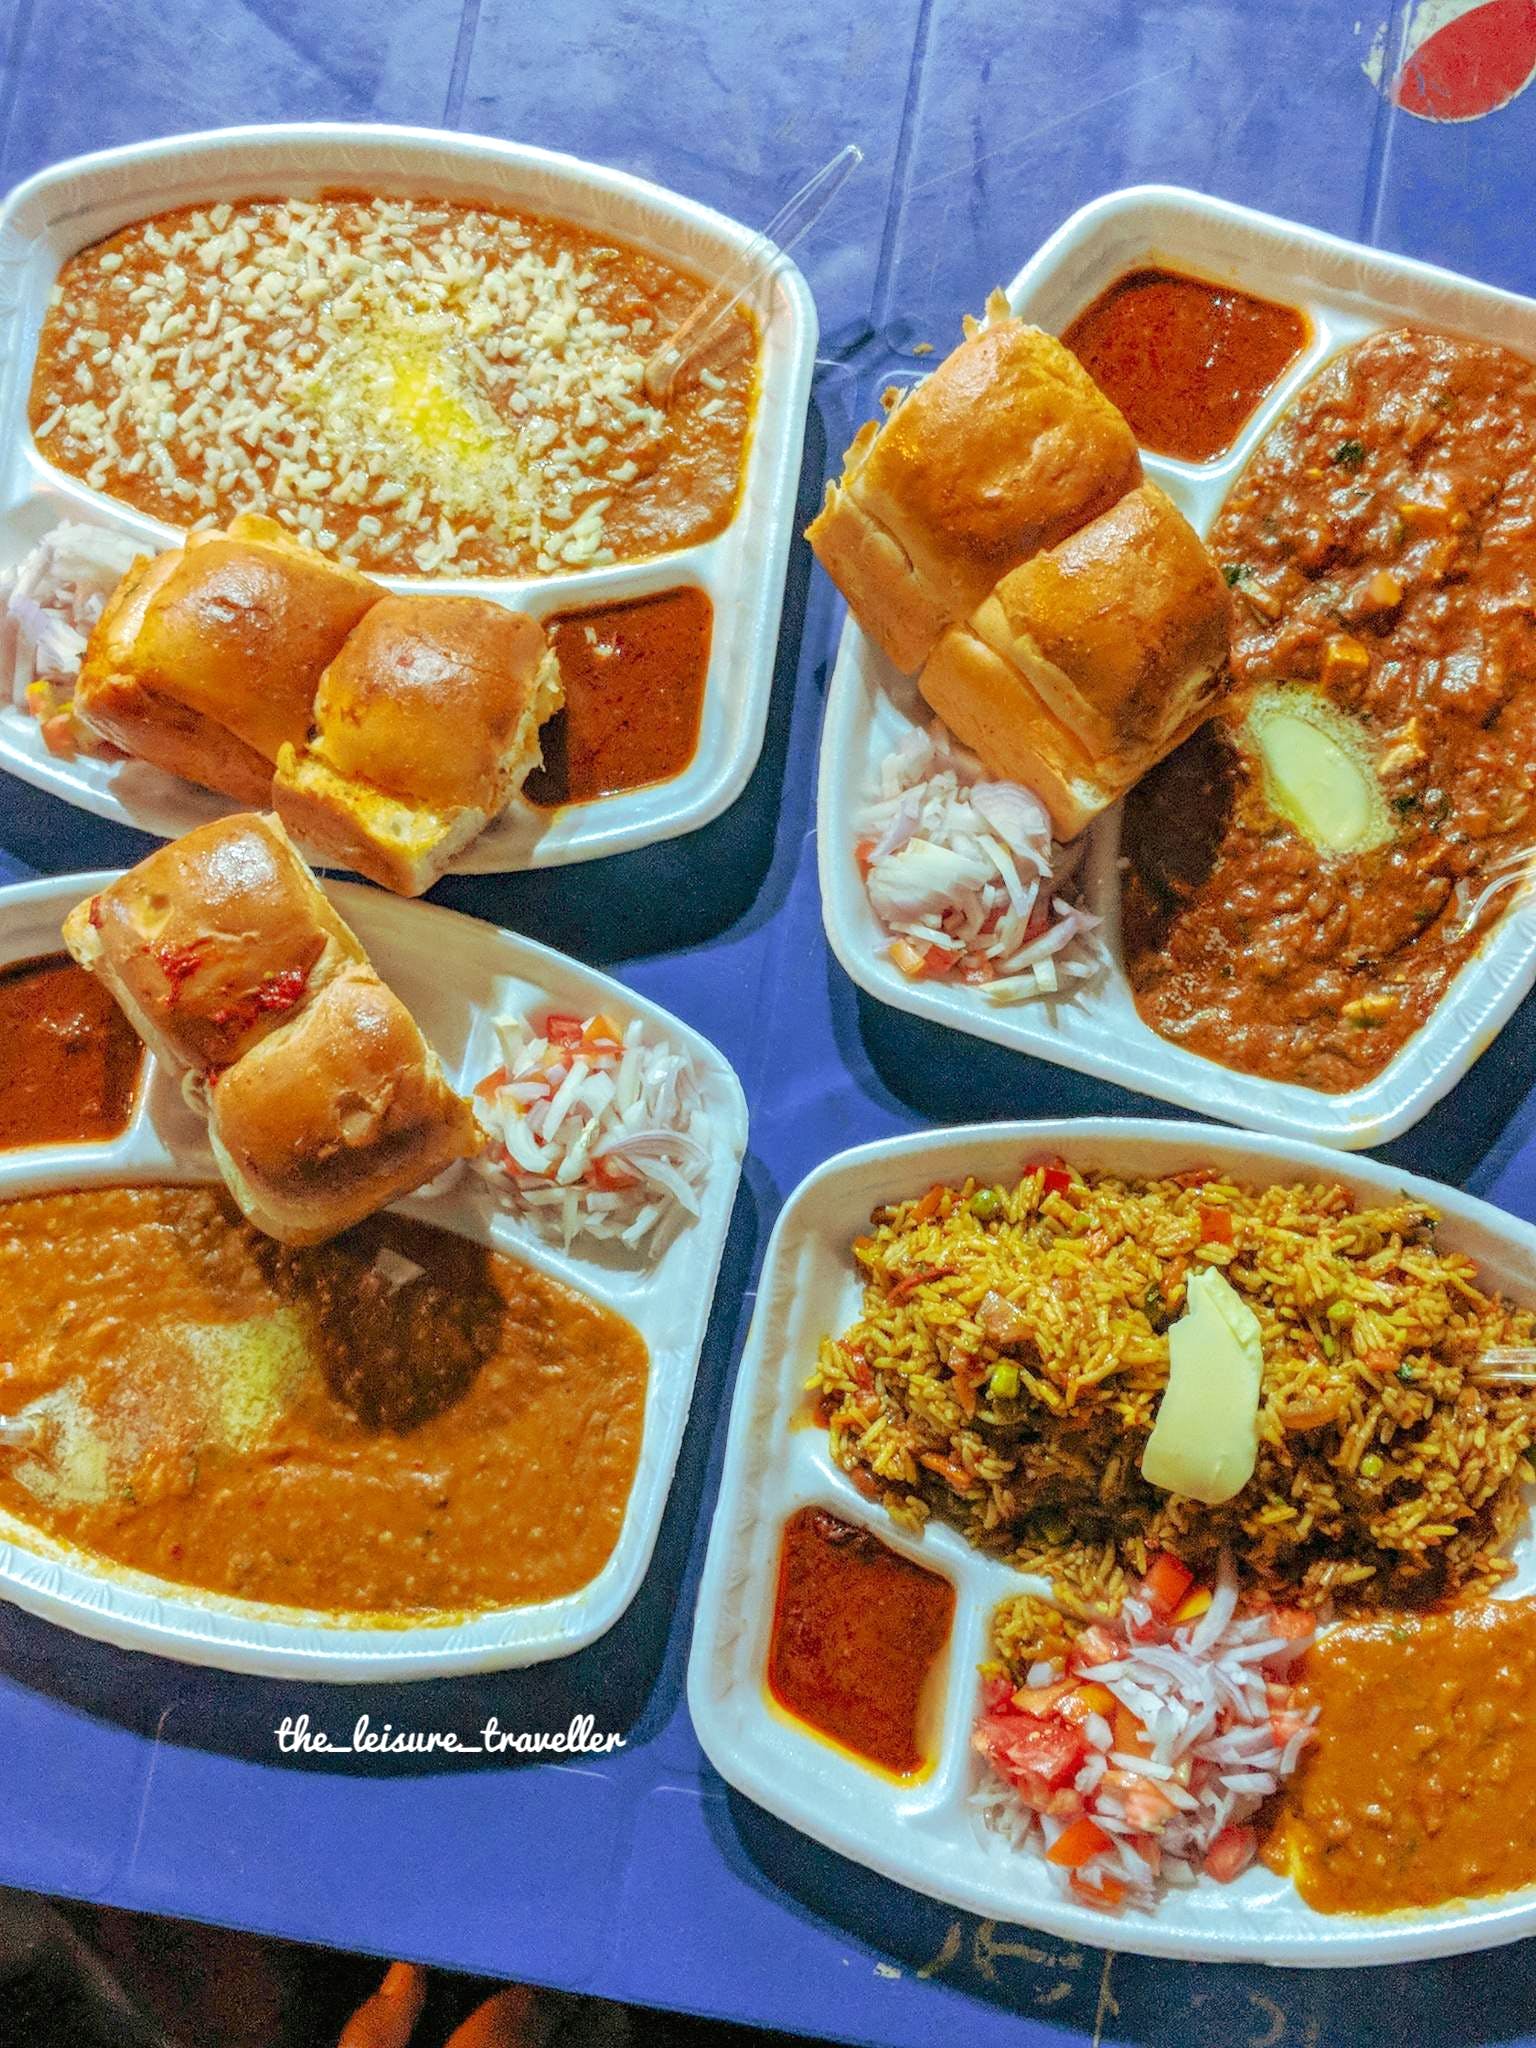 Dish,Food,Cuisine,Ingredient,Curry,Meal,Produce,Indian cuisine,Rice and curry,Gravy